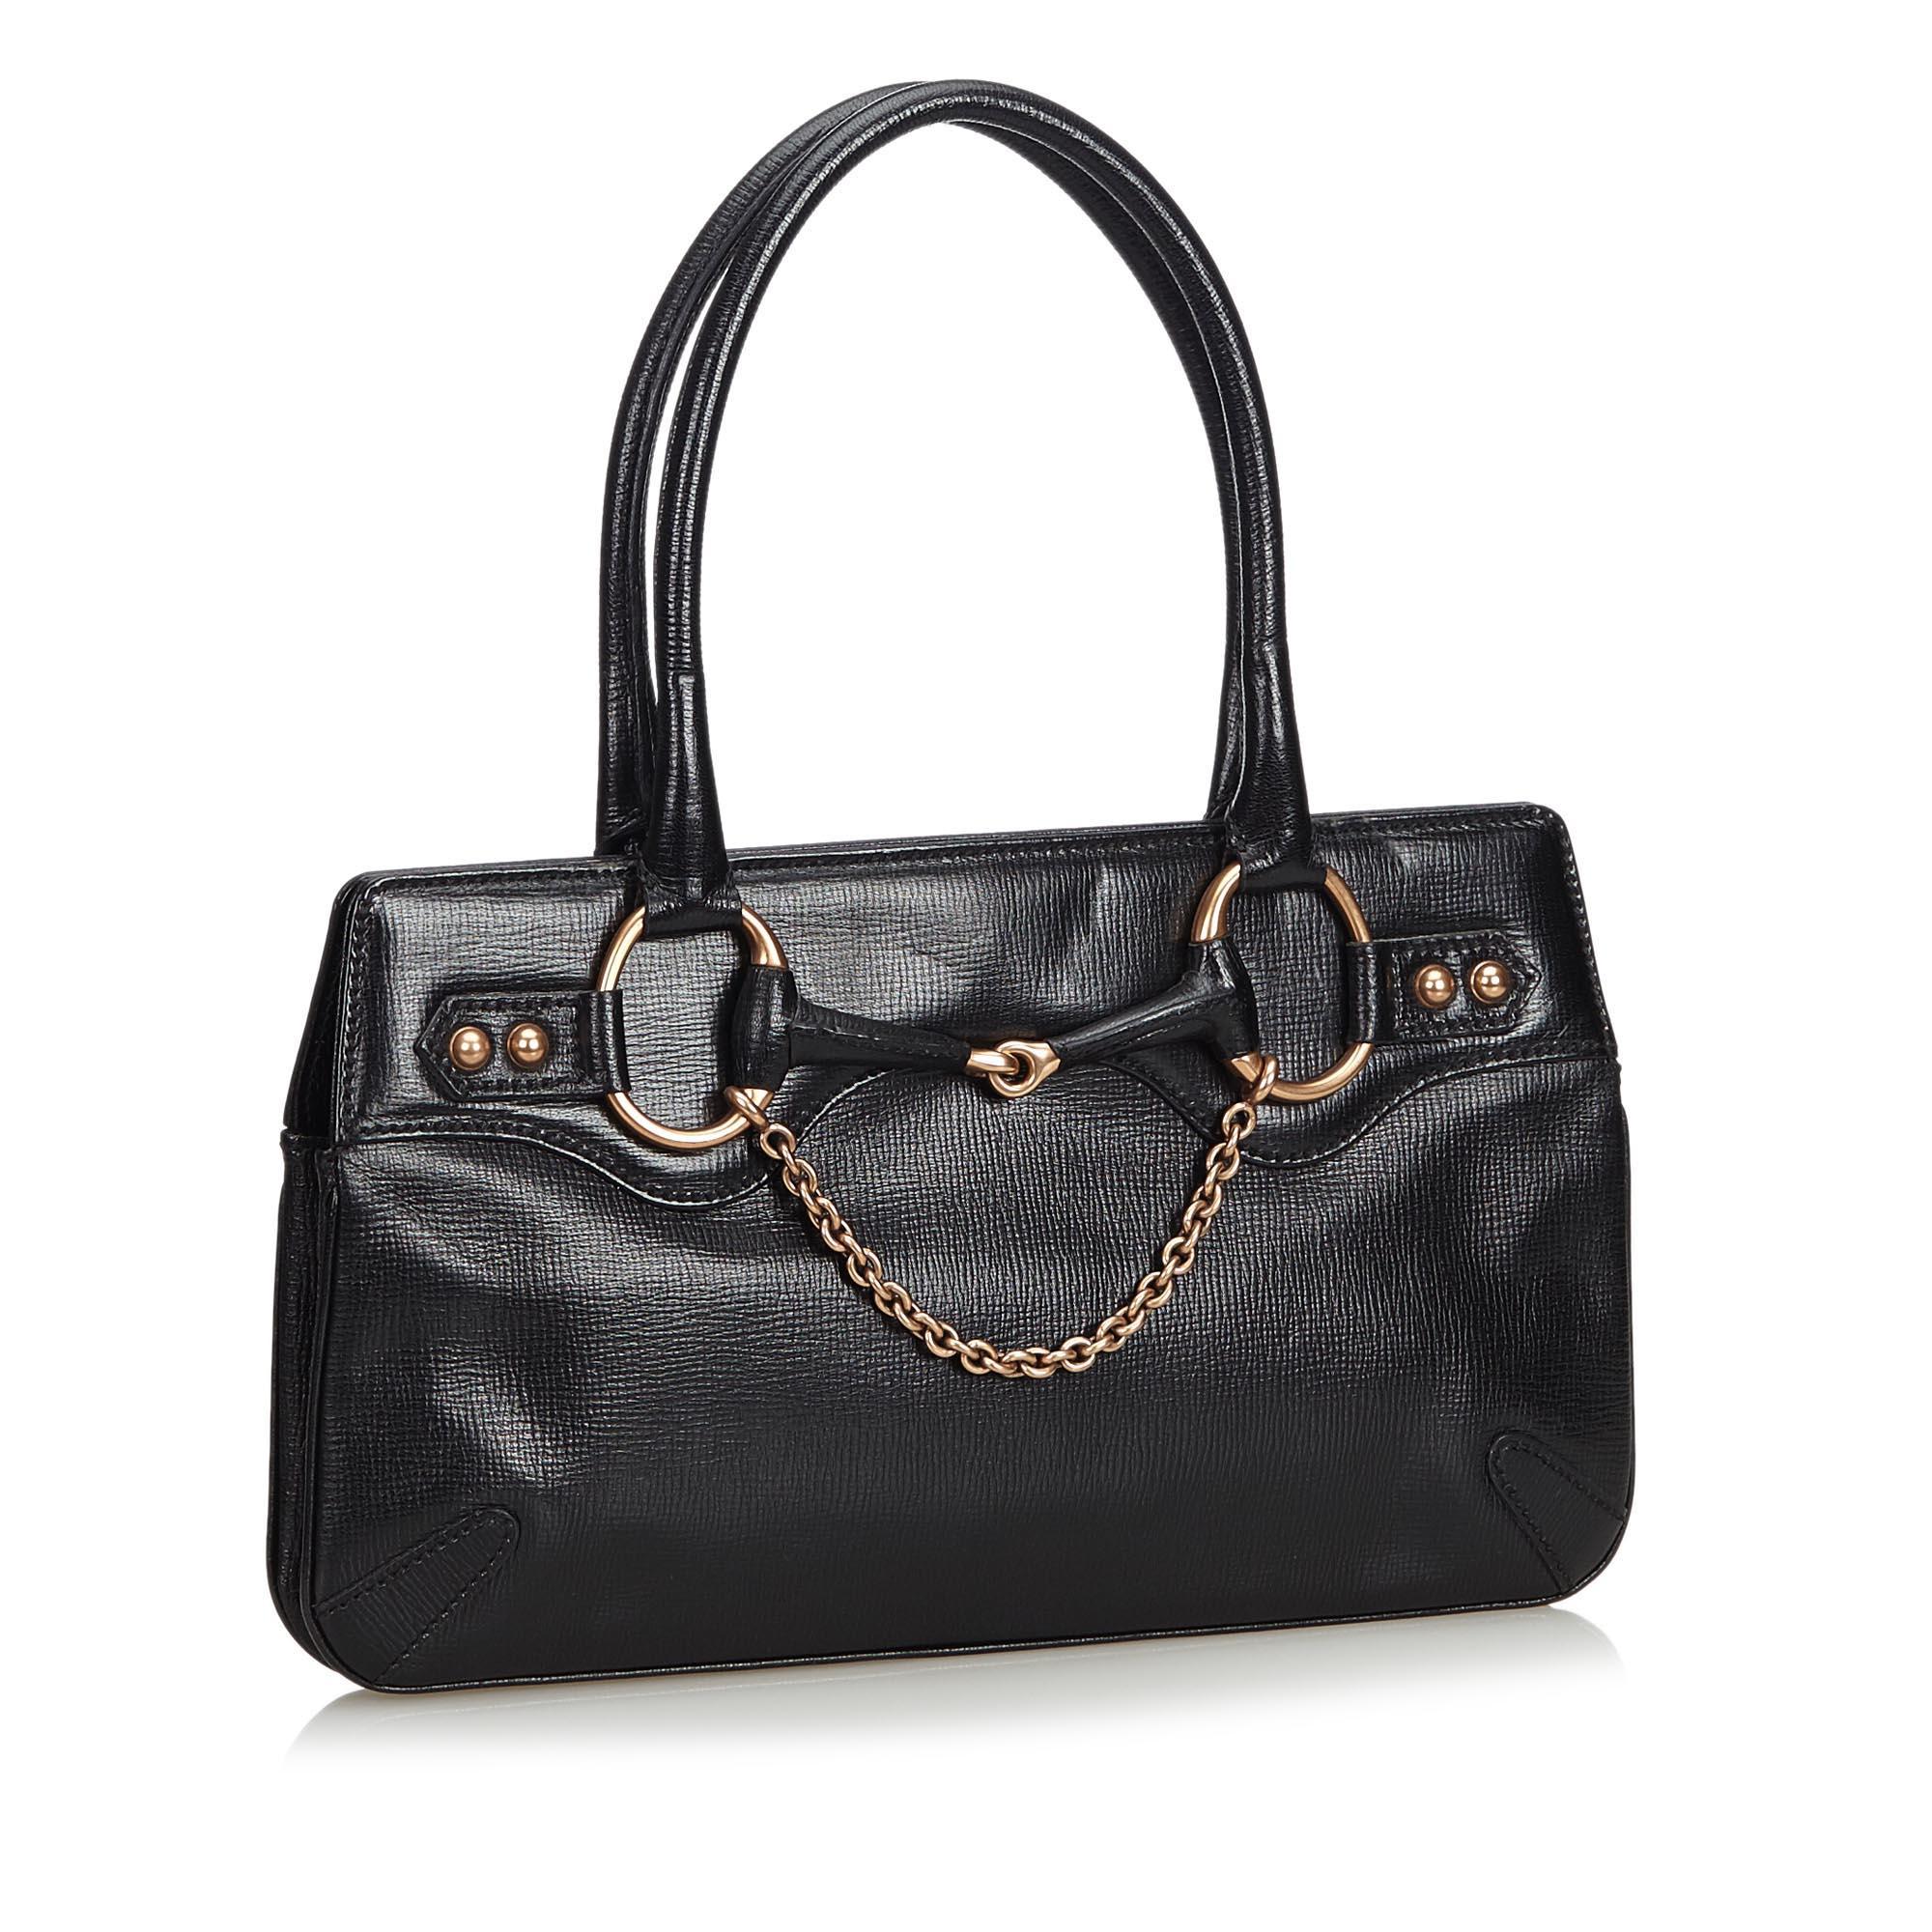 This handbag bag features a leather body, rolled leather handles with chain and horsebit details, an open top with a magnetic closure, and an interior zip pocket. It carries as AB condition rating.

Inclusions: 
This item does not come with